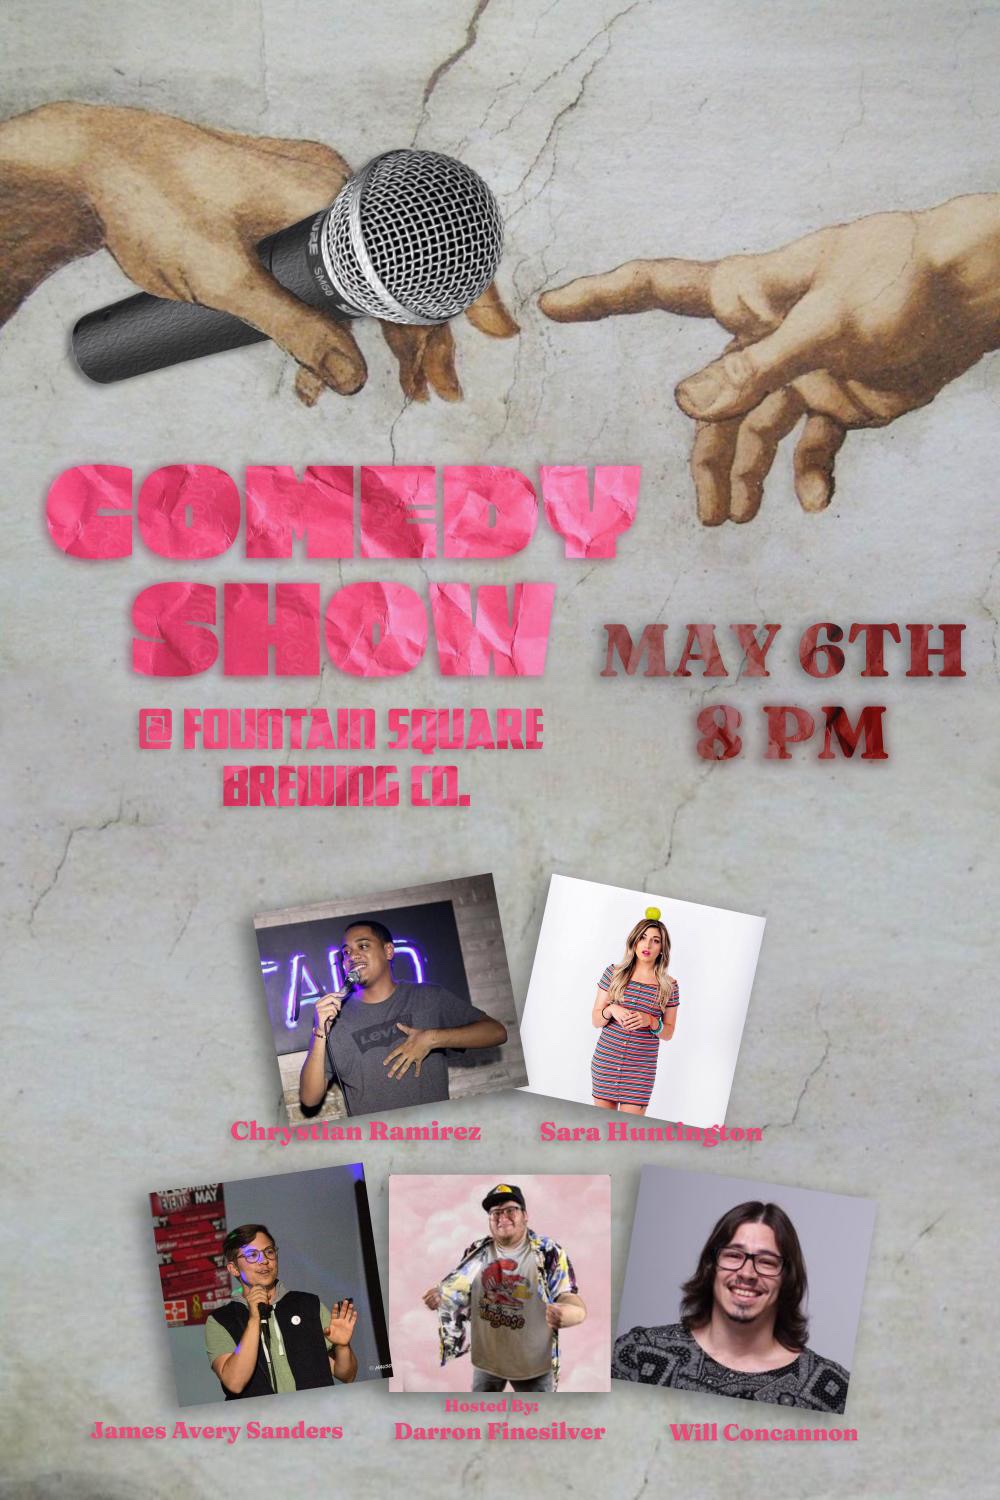 comedy show at fountain square brew is saturday may 6 at 8 pm